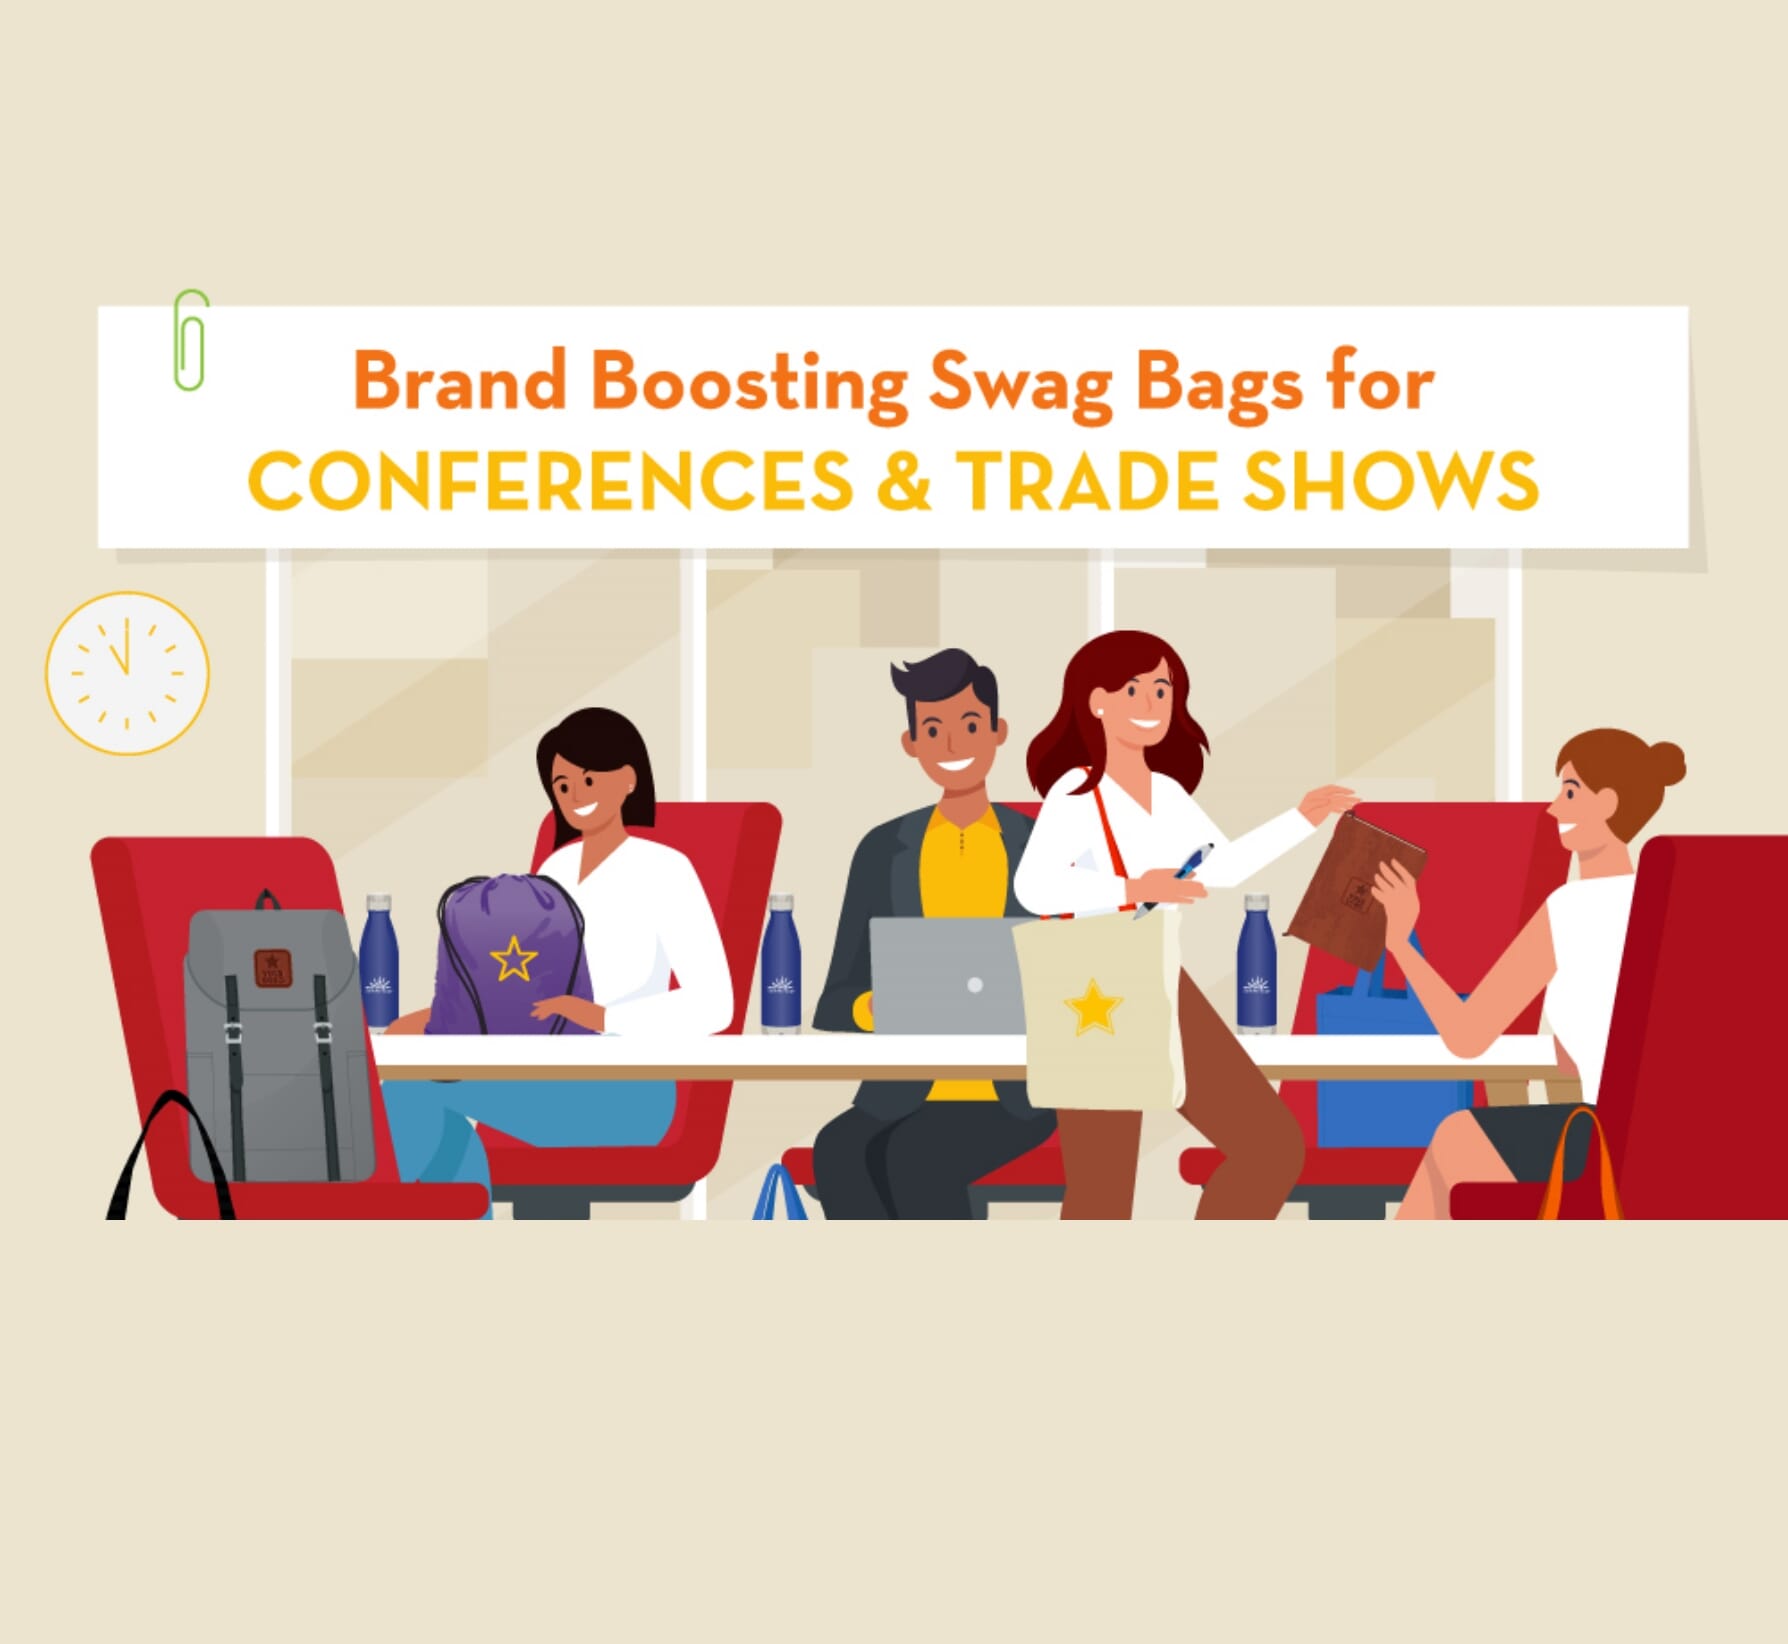  Event Goodie Bags & Gift Bags – Best Conference Swag Bag Ideas